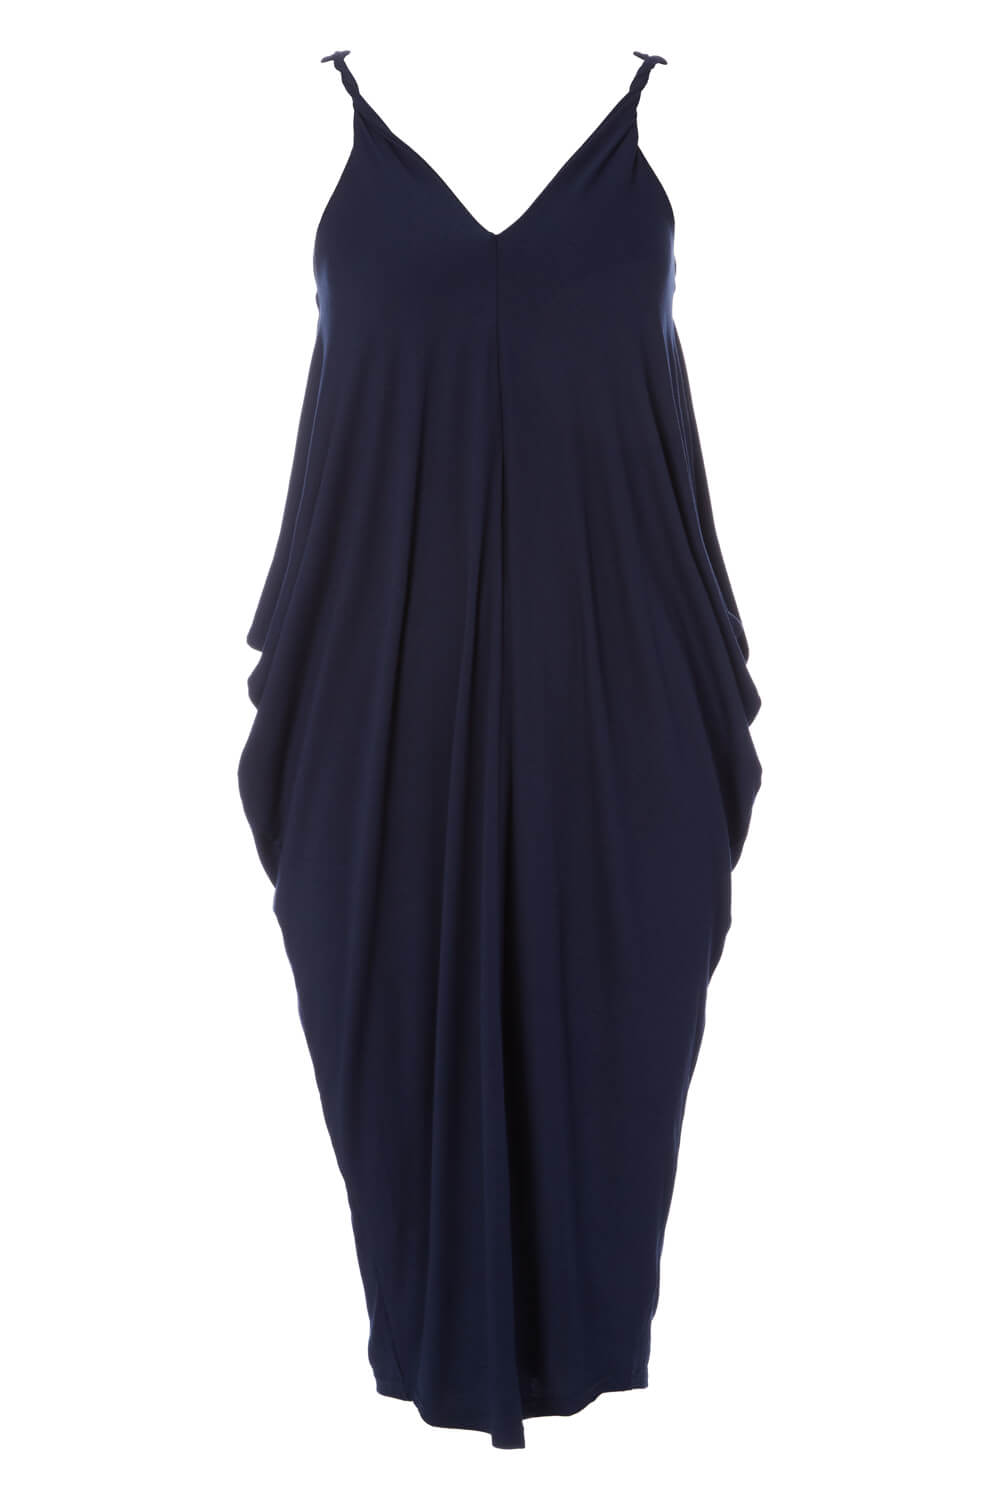  Jersey Slouch Dress, Image 5 of 5